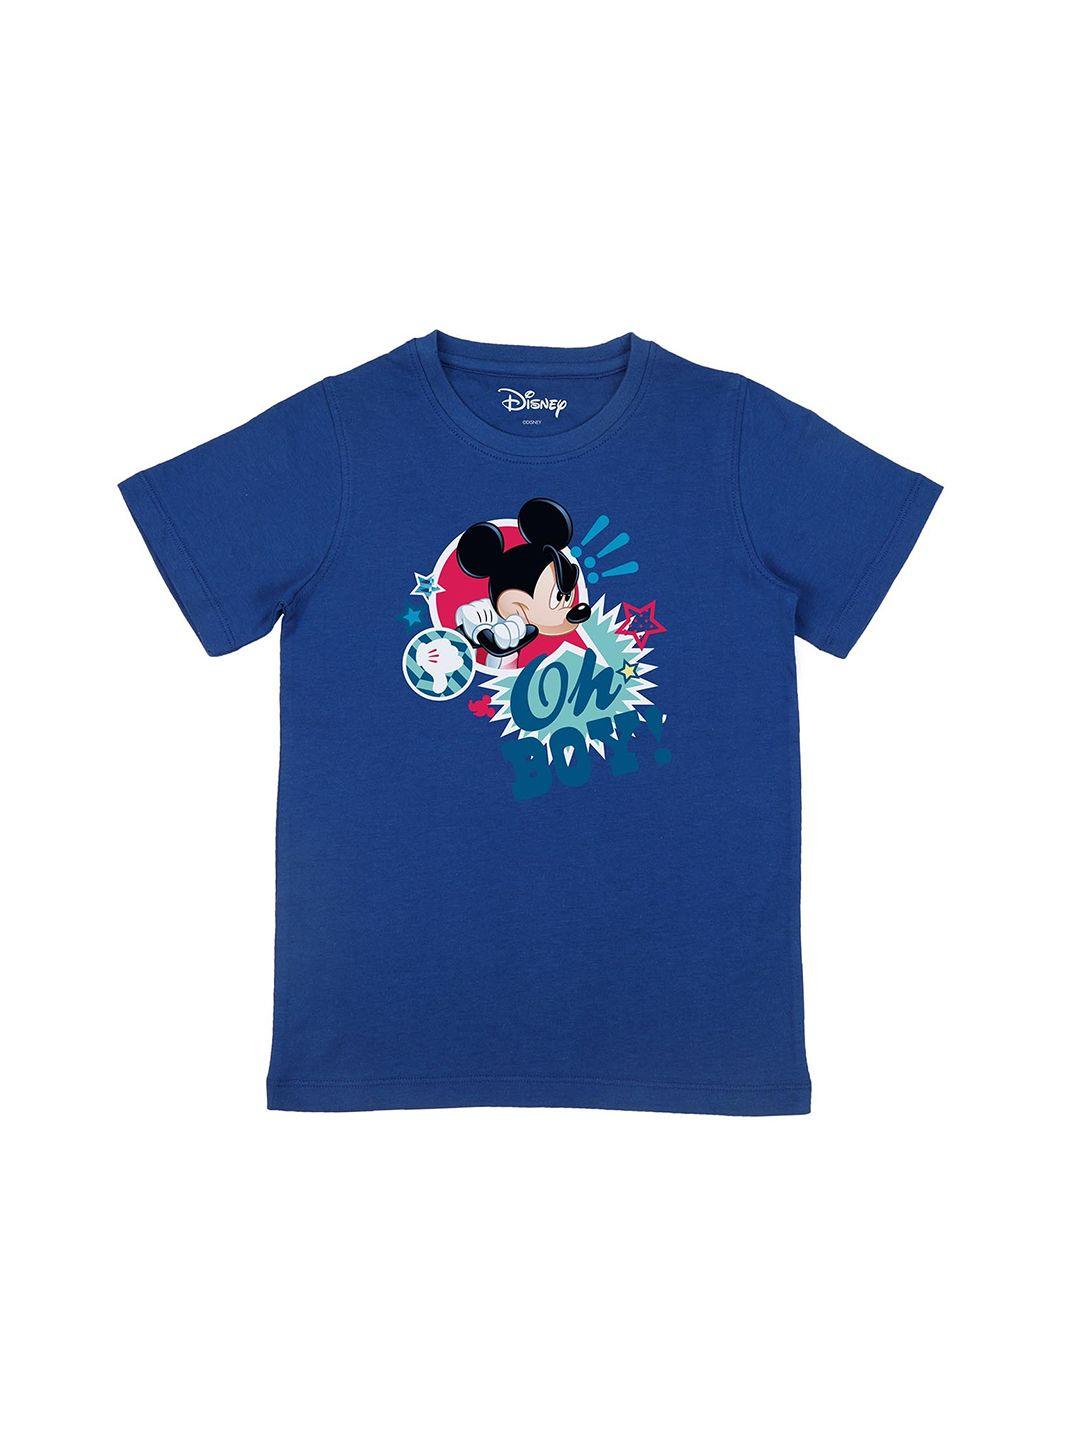 disney-by-wear-your-mind-boys-blue-mickey-mouse-printed-t-shirt